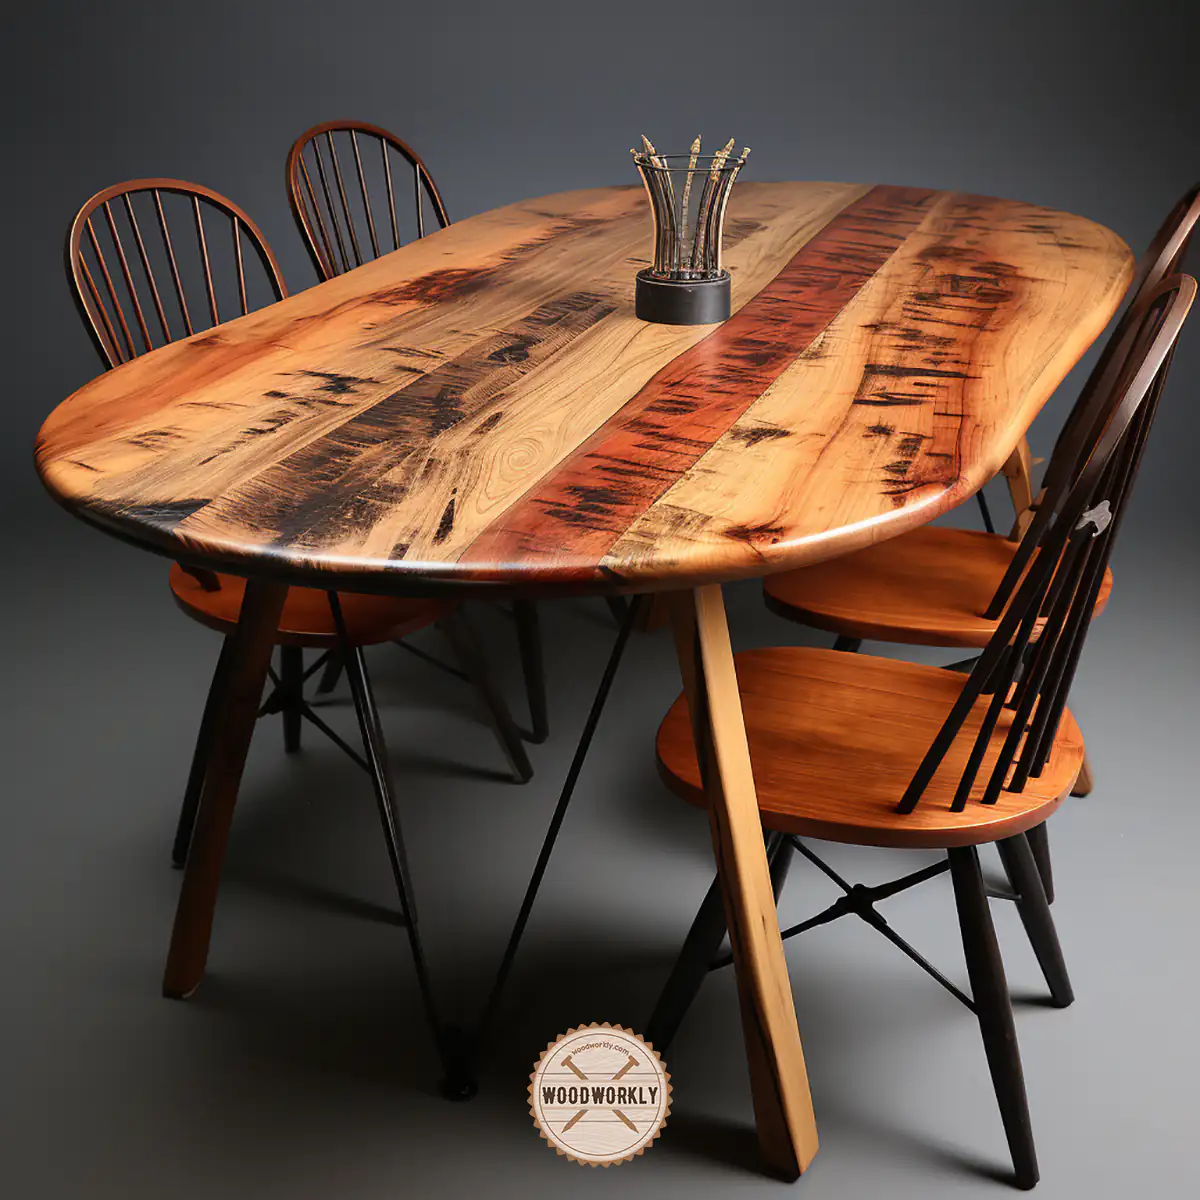 Cottonwood dining table